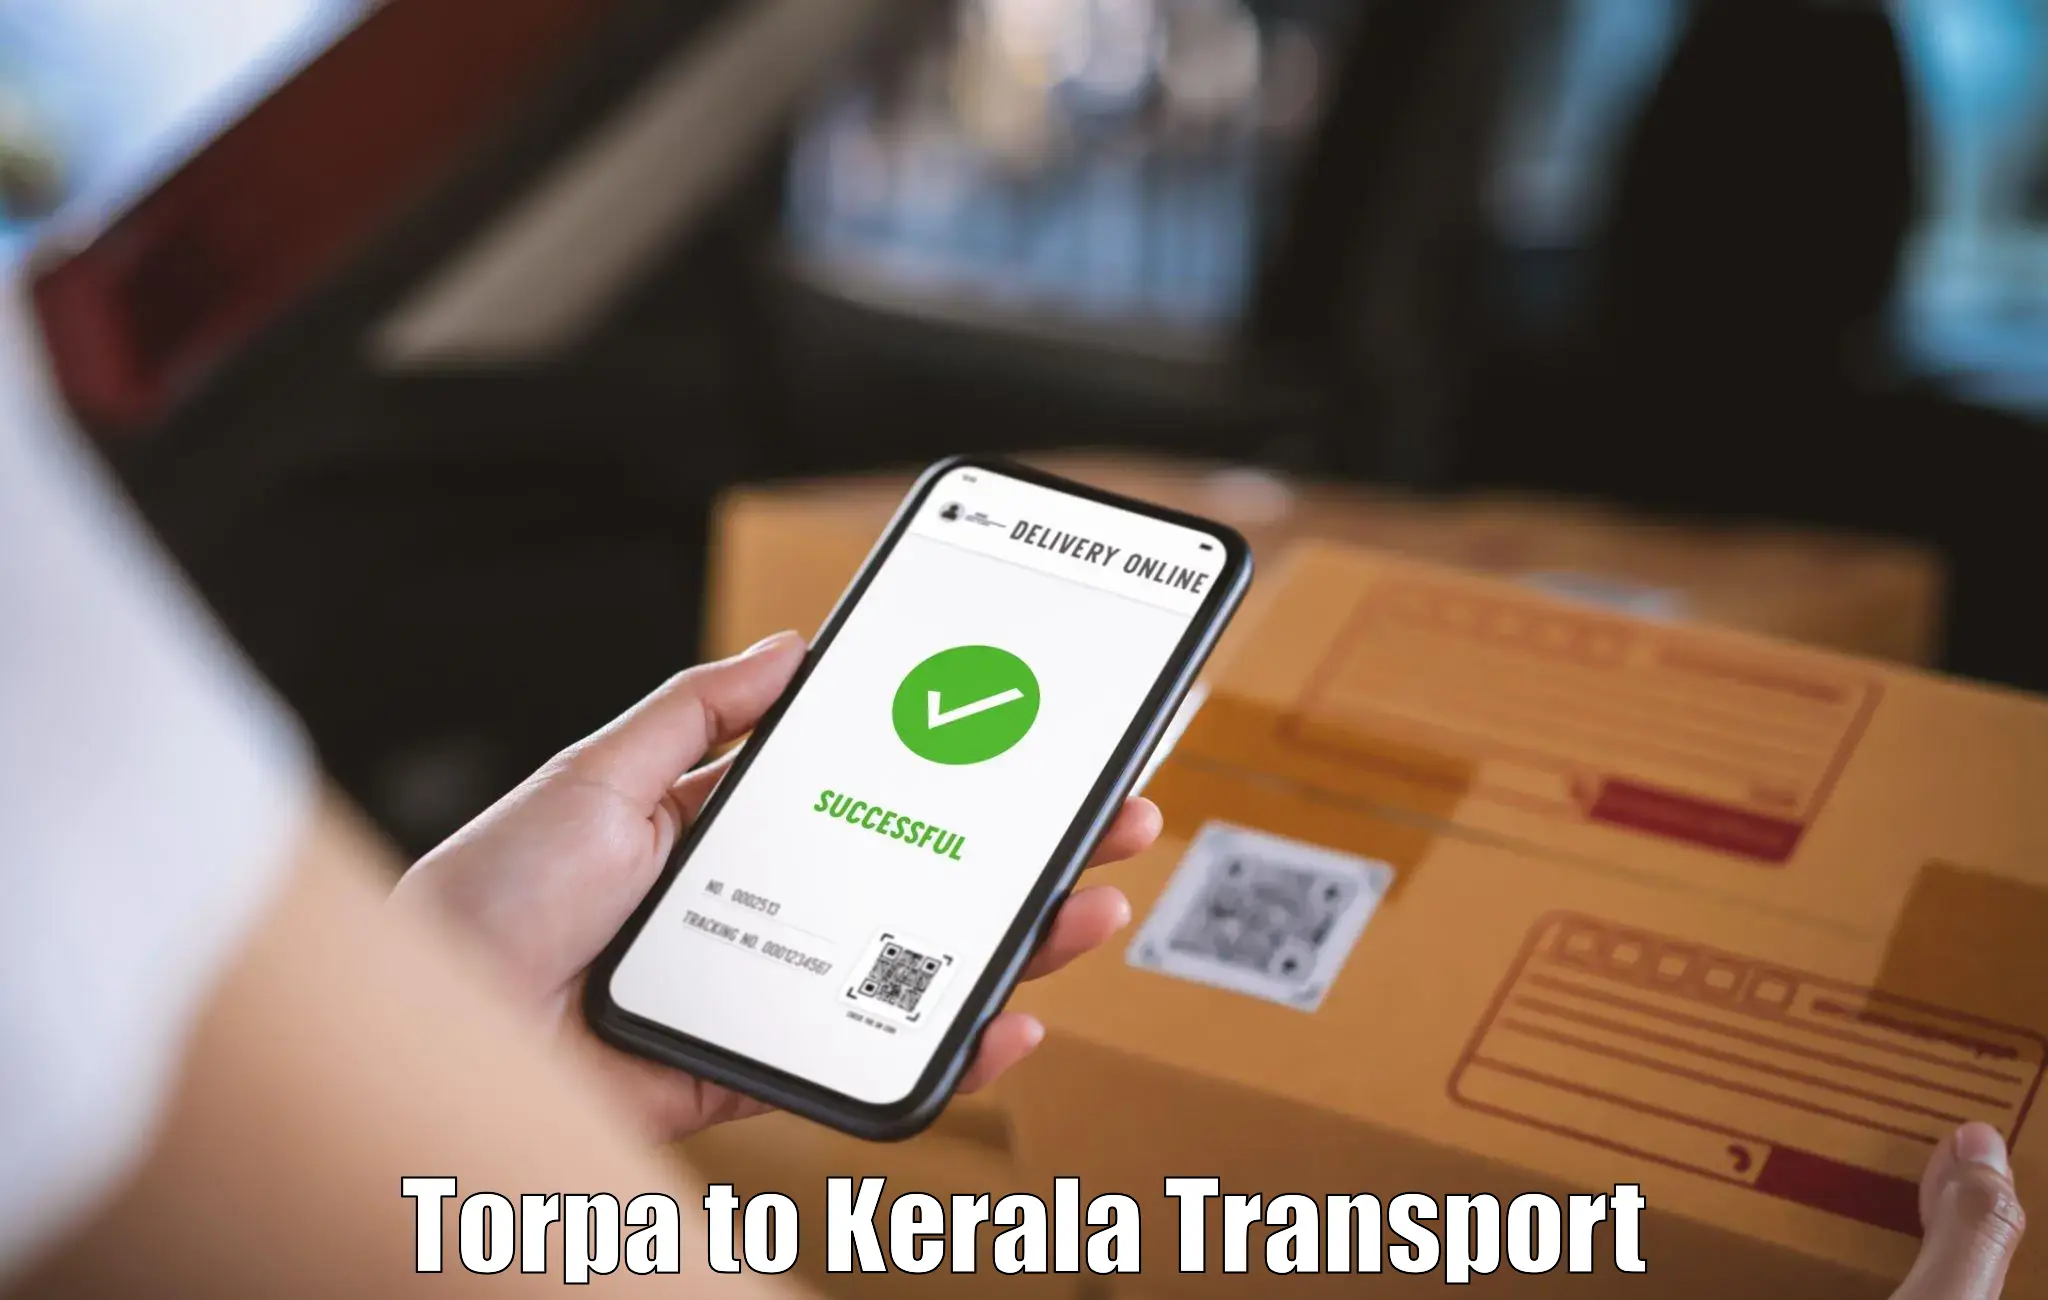 Transport shared services Torpa to Calicut